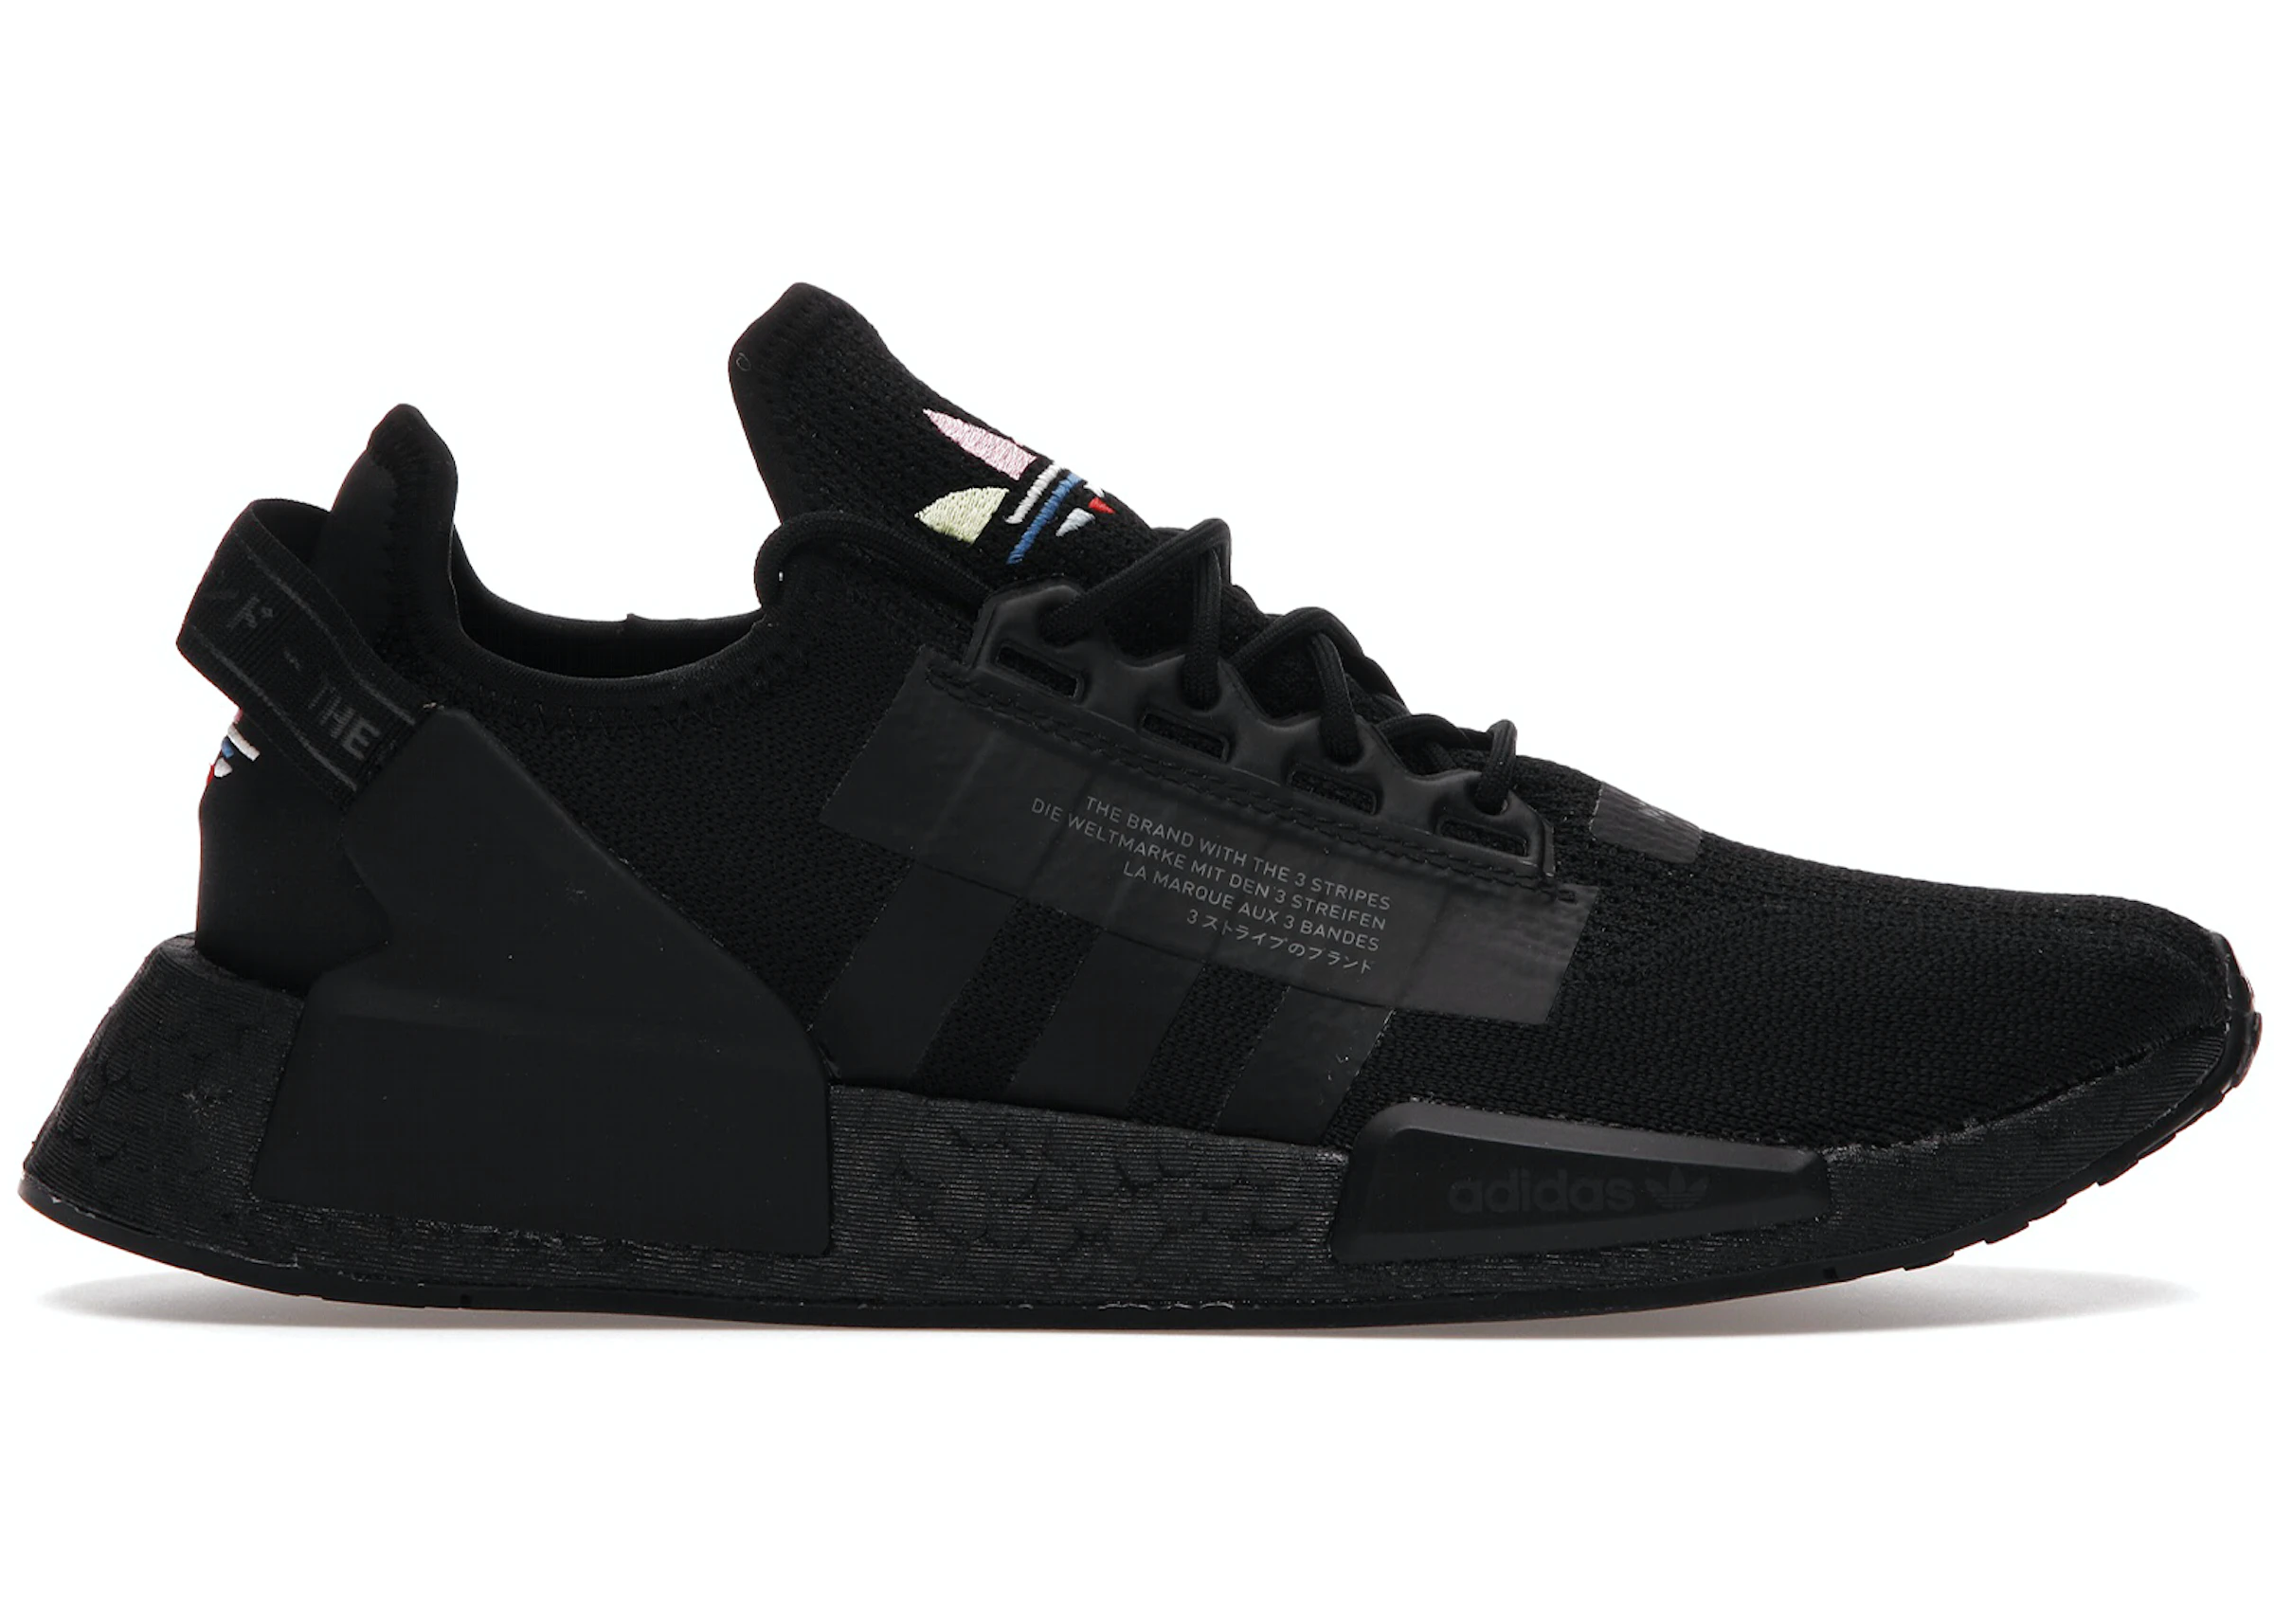 boundary Experienced person advice adidas NMD - All Sizes & Colorways at StockX